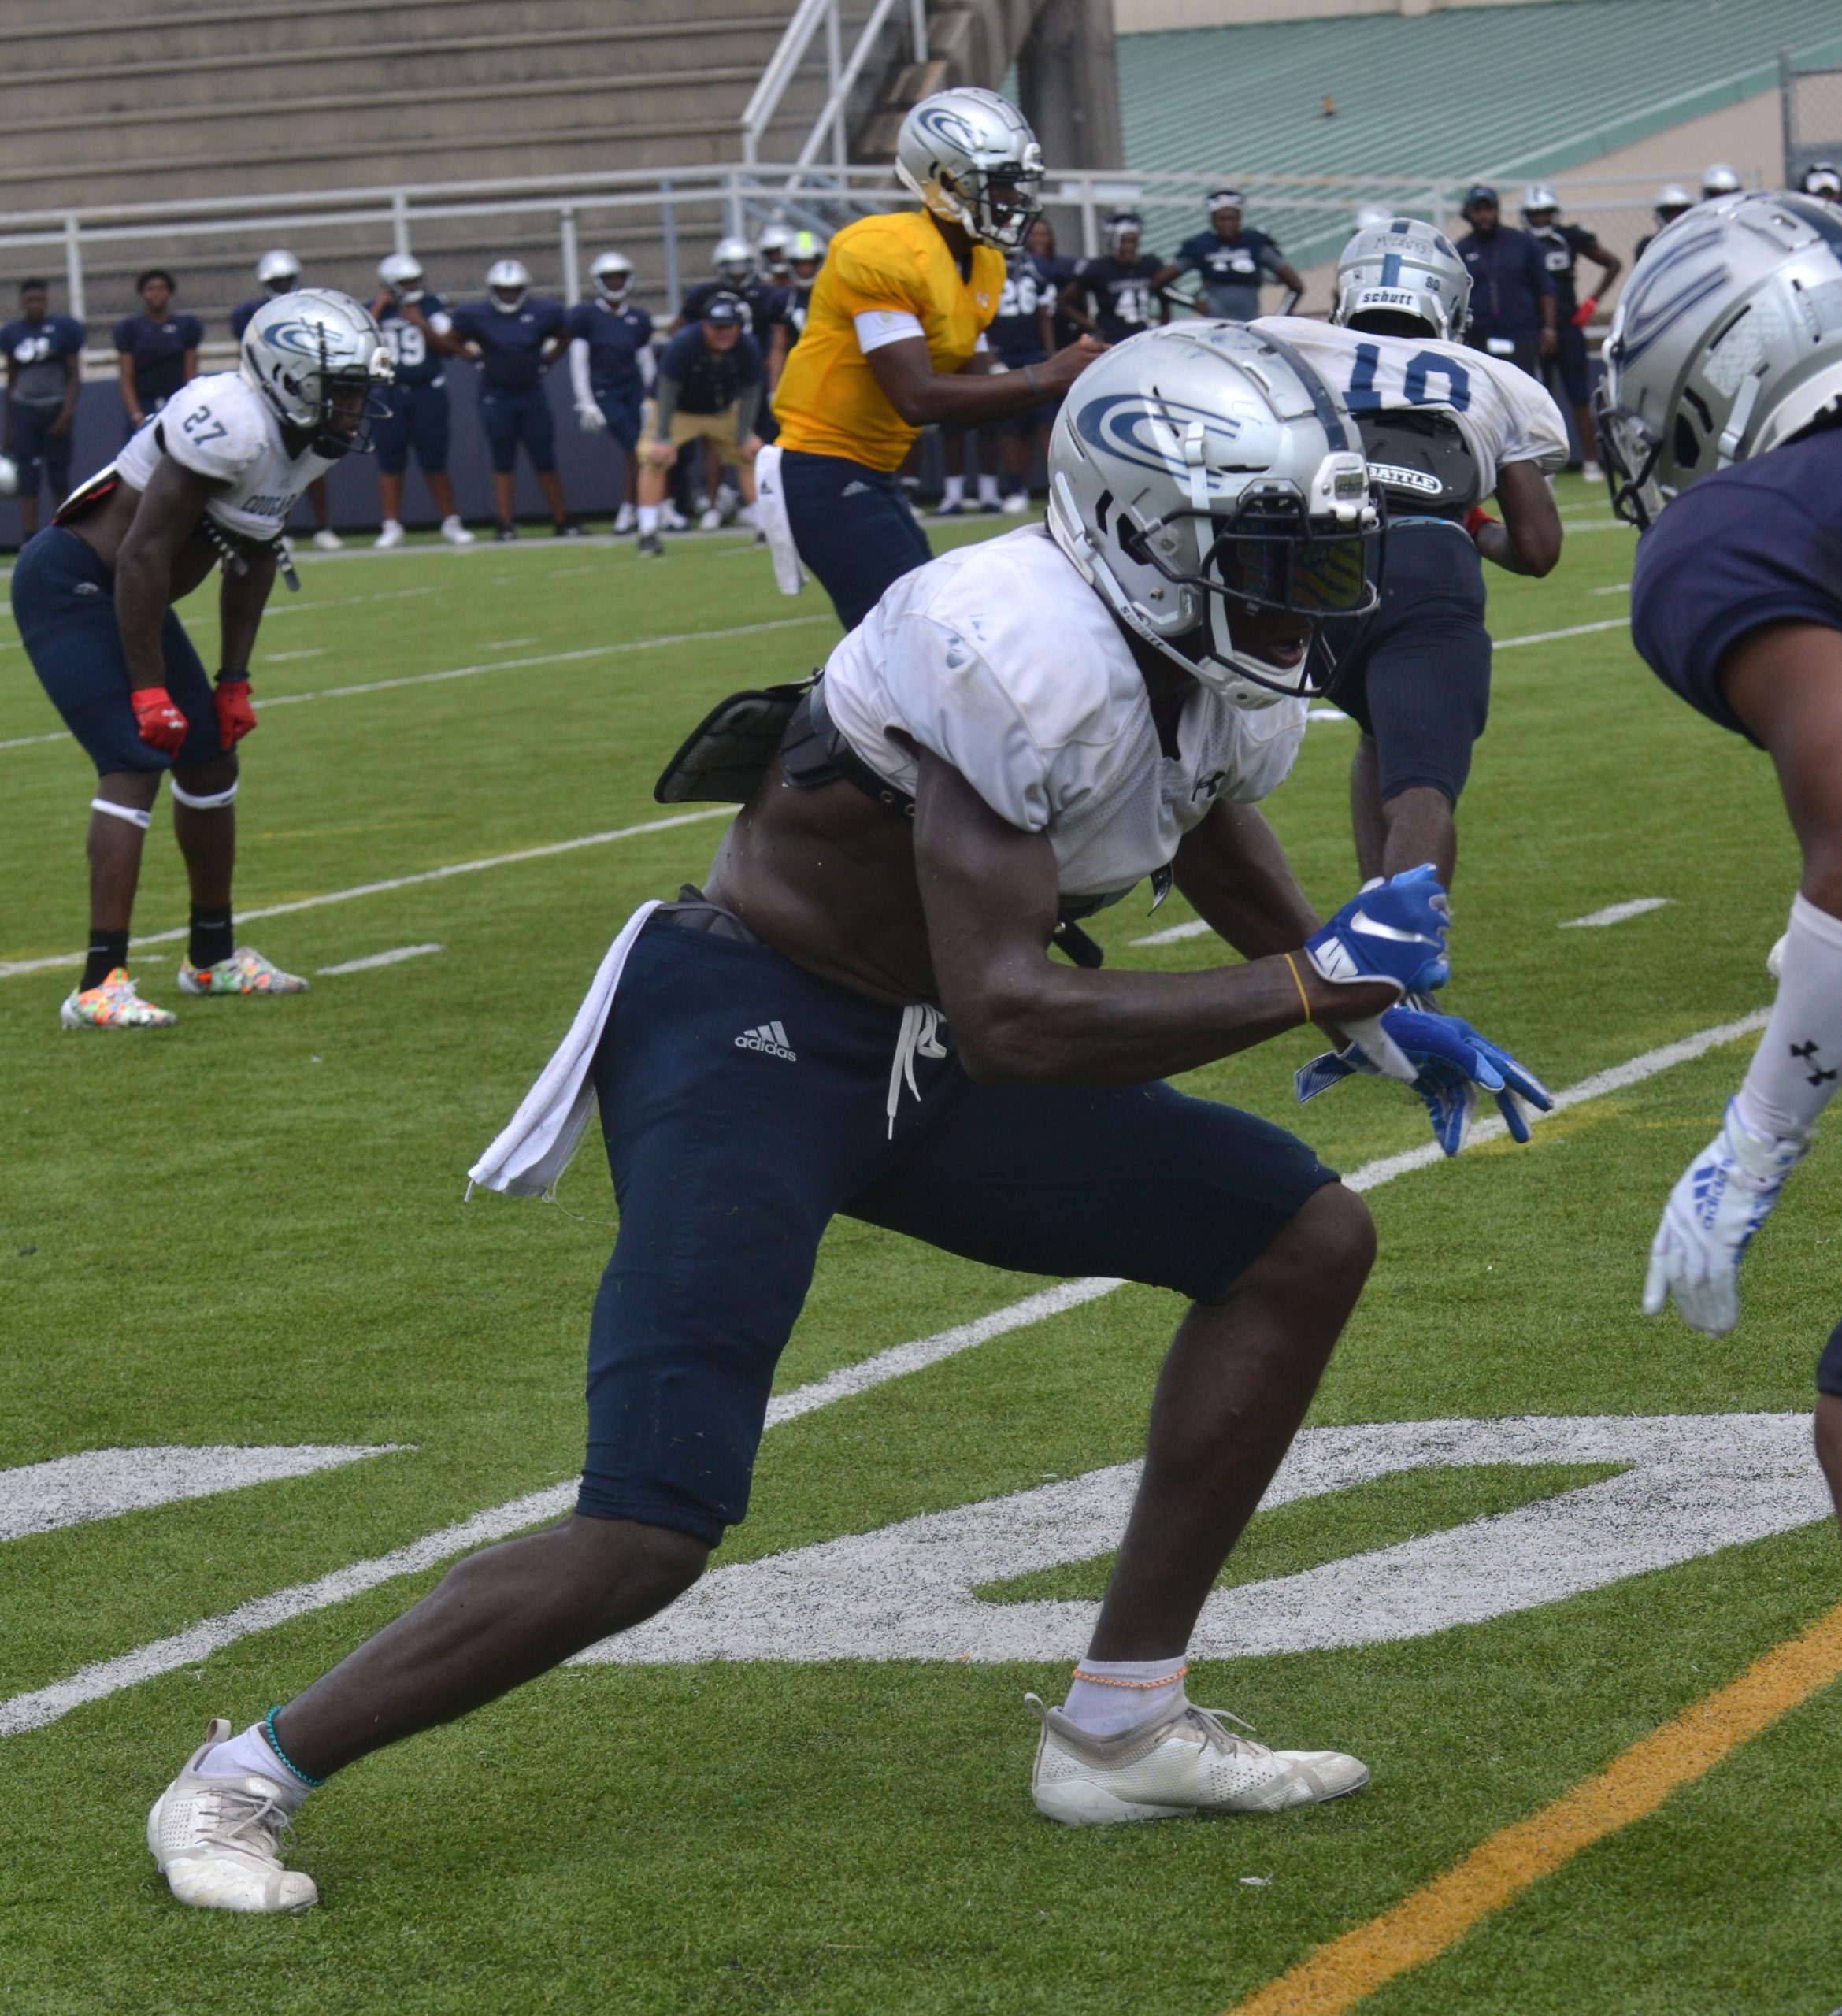 PRESEASON PREVIEW: No. 8 Clay-Chalkville wants more ball control